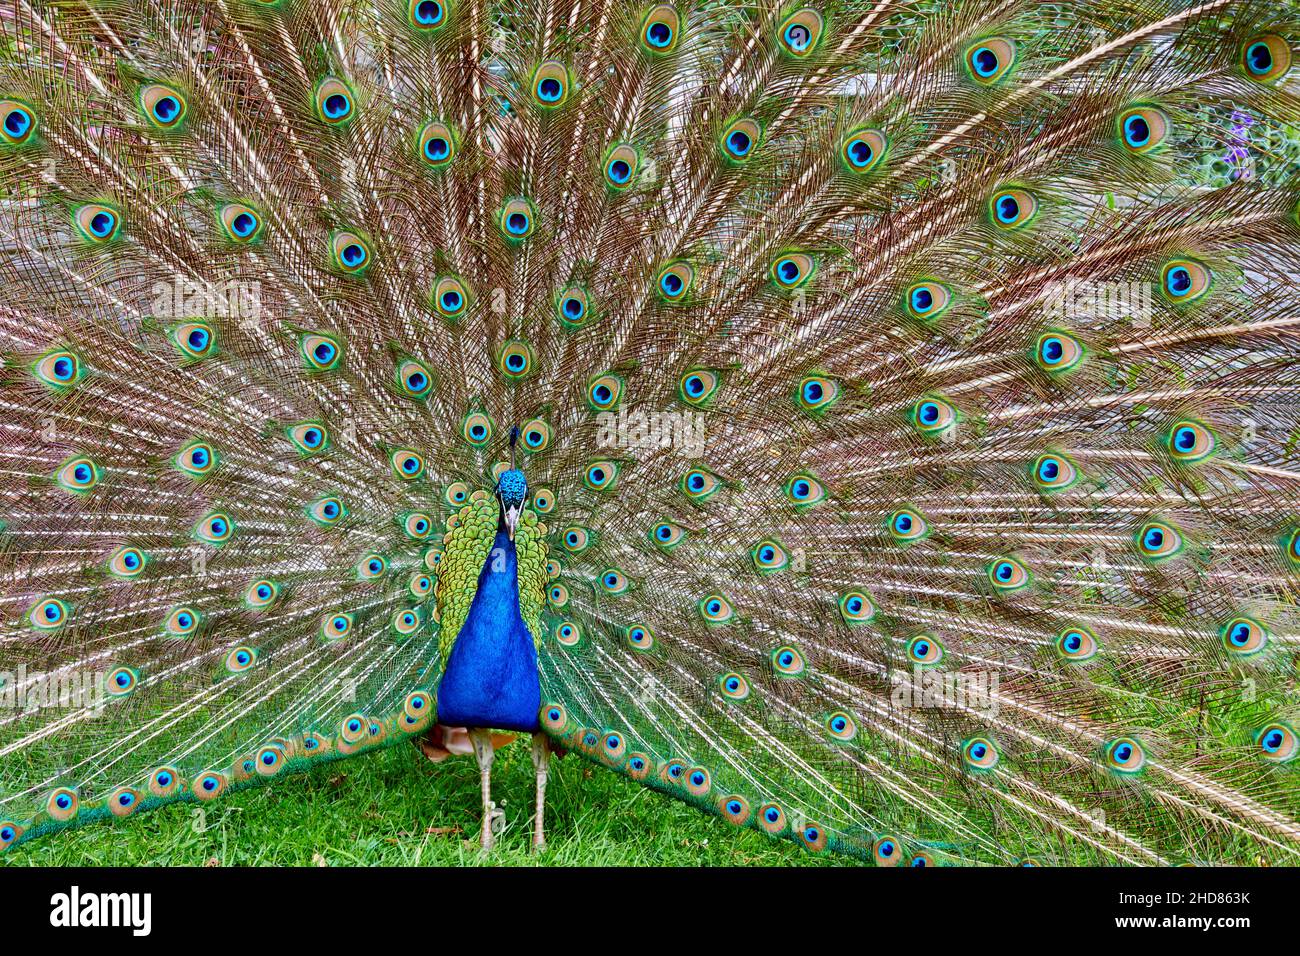 Close up of an Indian peacock, Pavo cristatus, with its tail feathers raised in display. Stock Photo